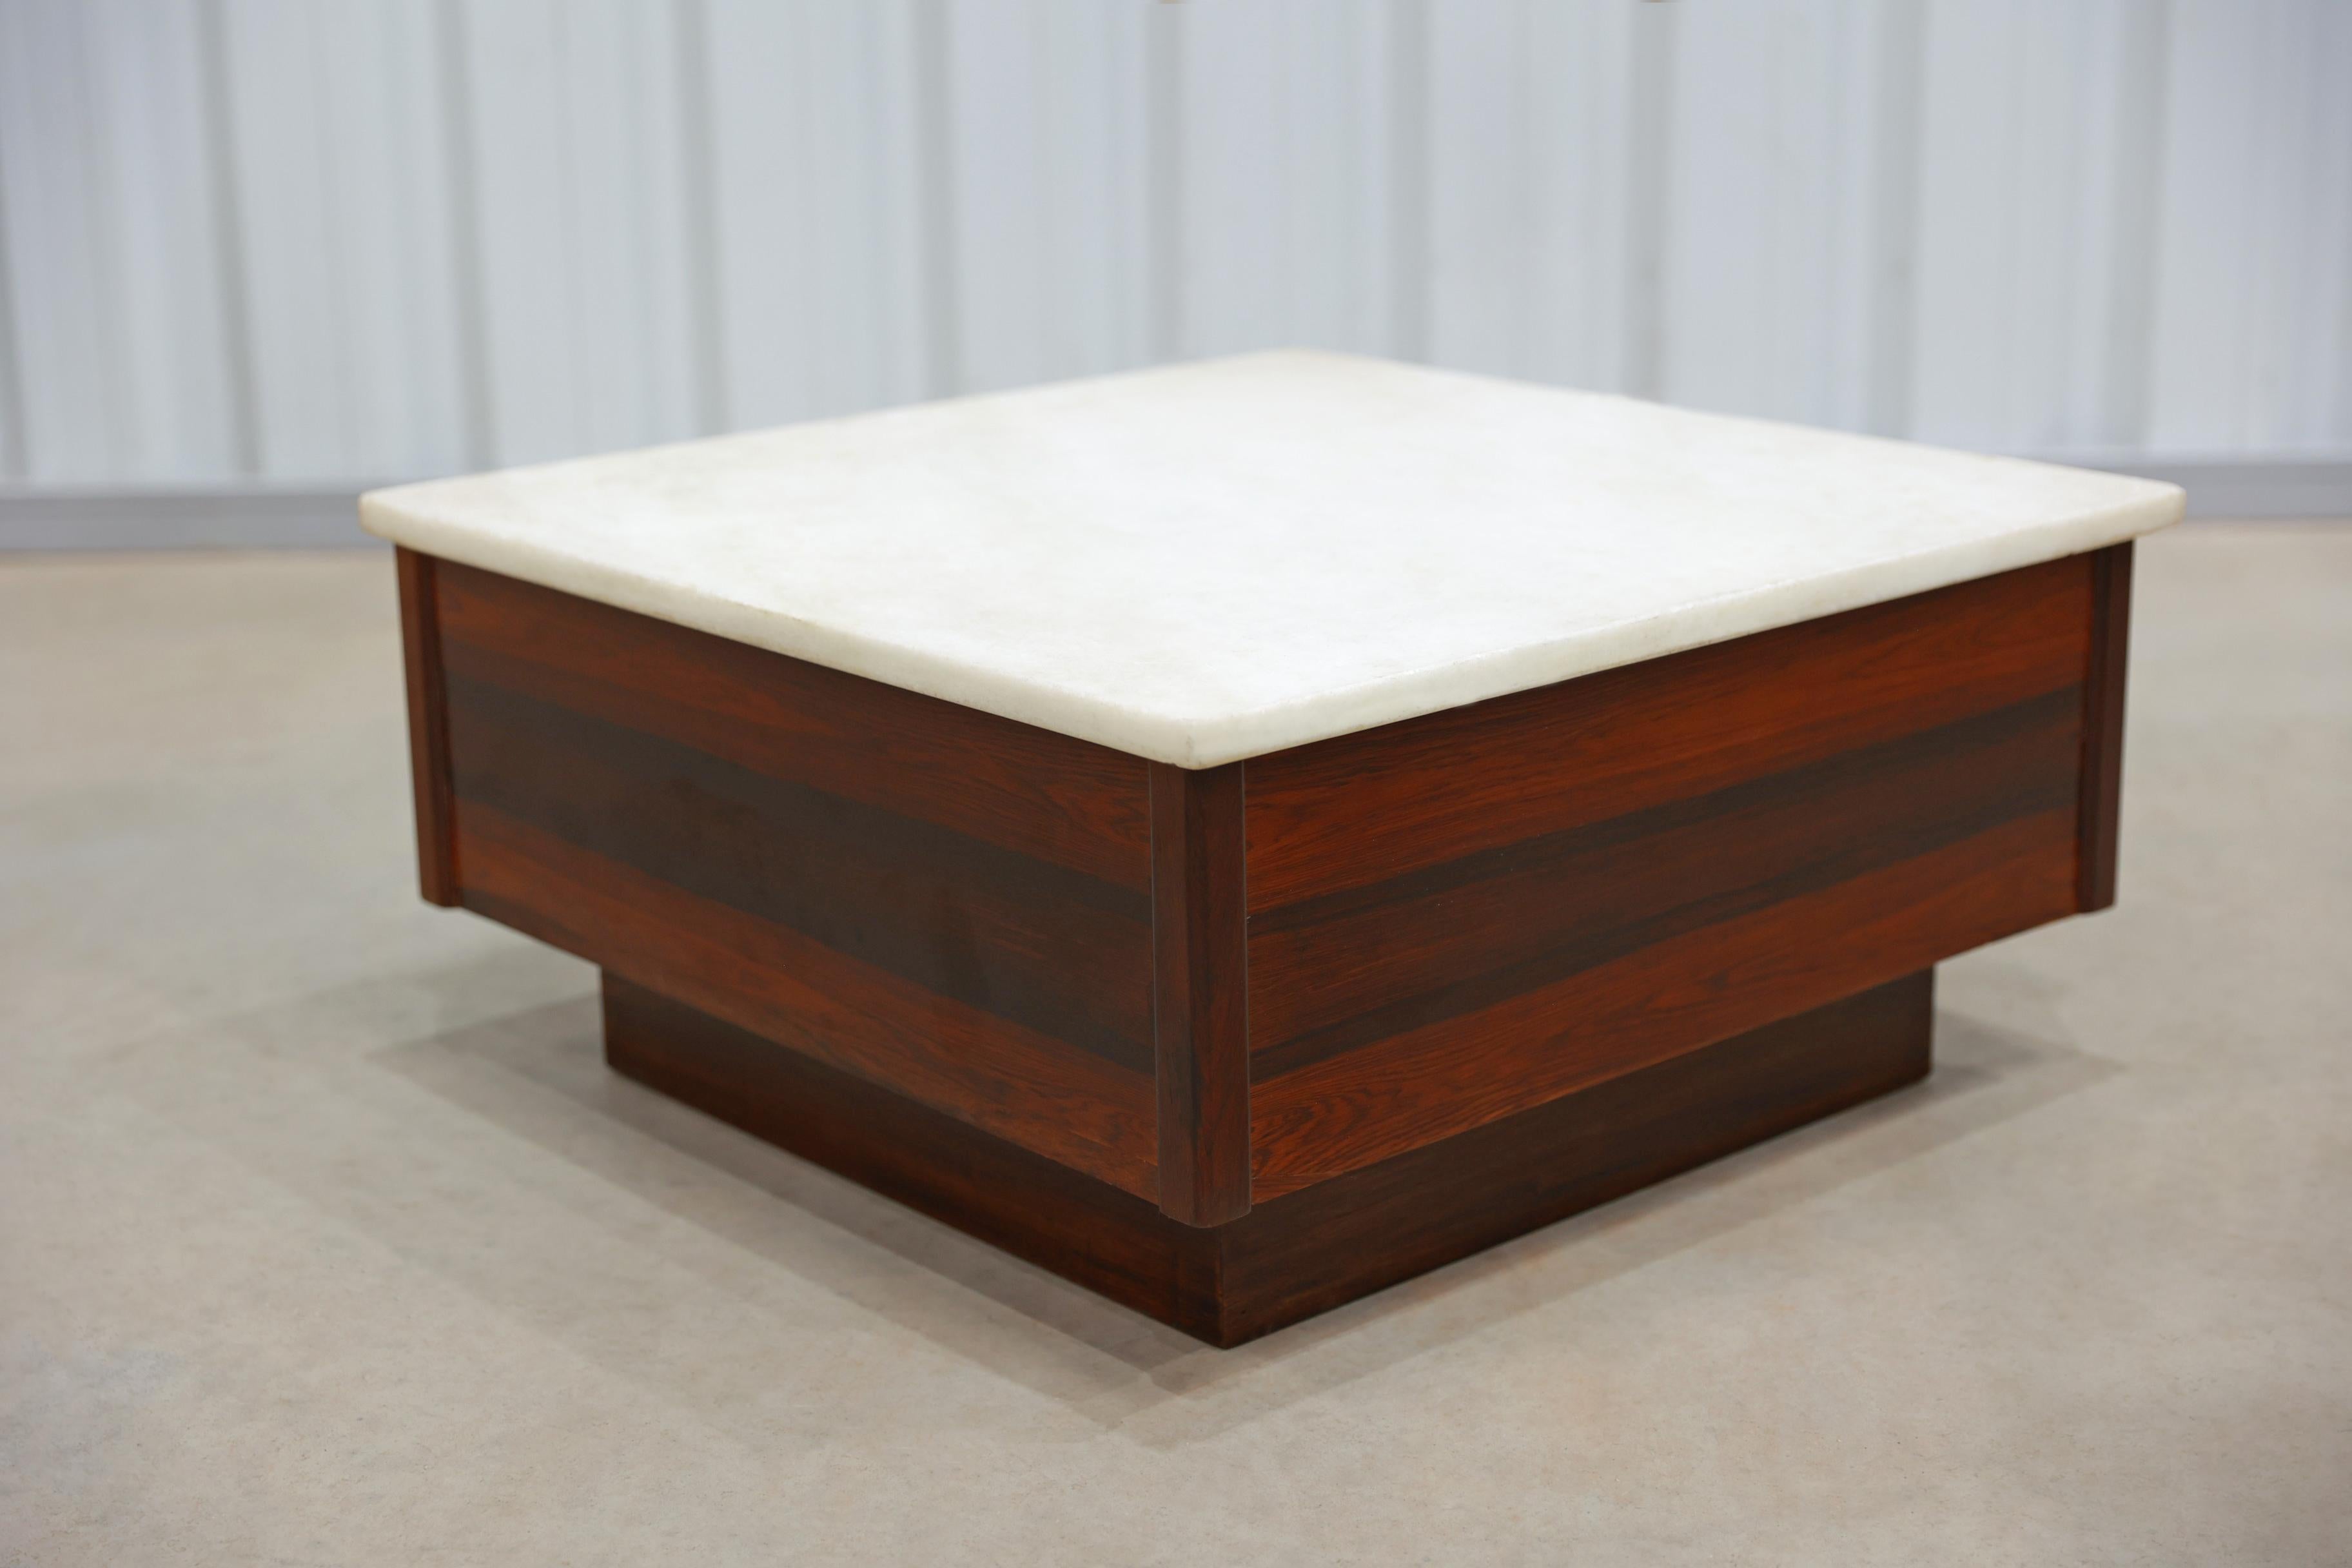 Mid-Century Modern Brazilian Modern Coffee Table in Hardwood & Marble Top, Unknown, c. 1960 For Sale